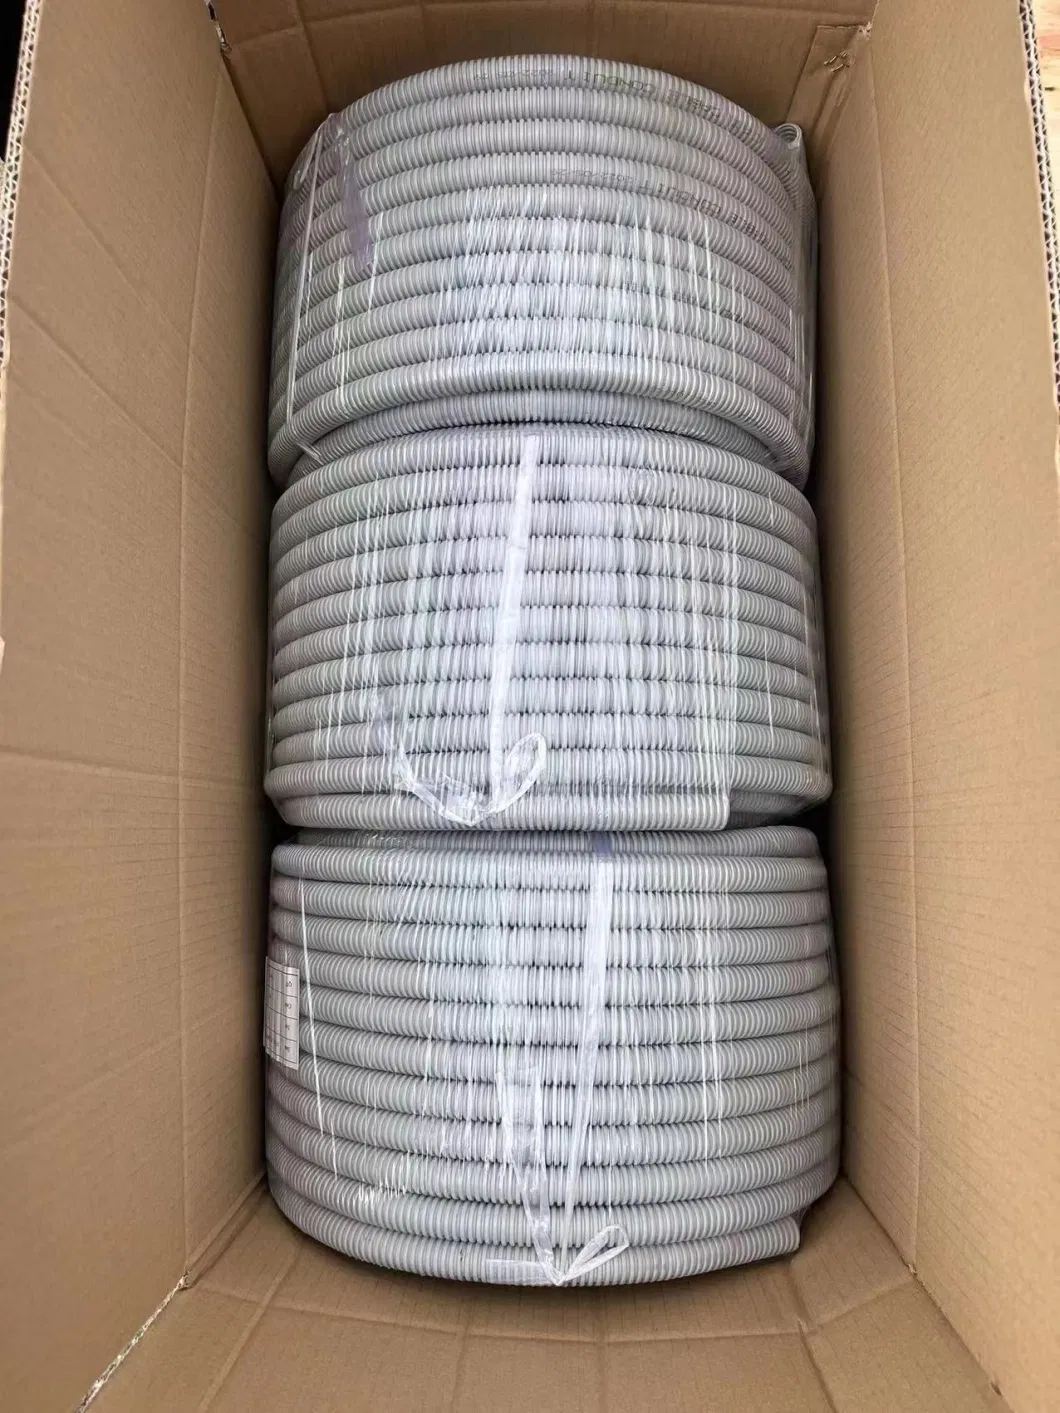 Ctube AS/NZS 2053 Solar Electrical PVC Conduits Flexible Pipe Hose for PV Project